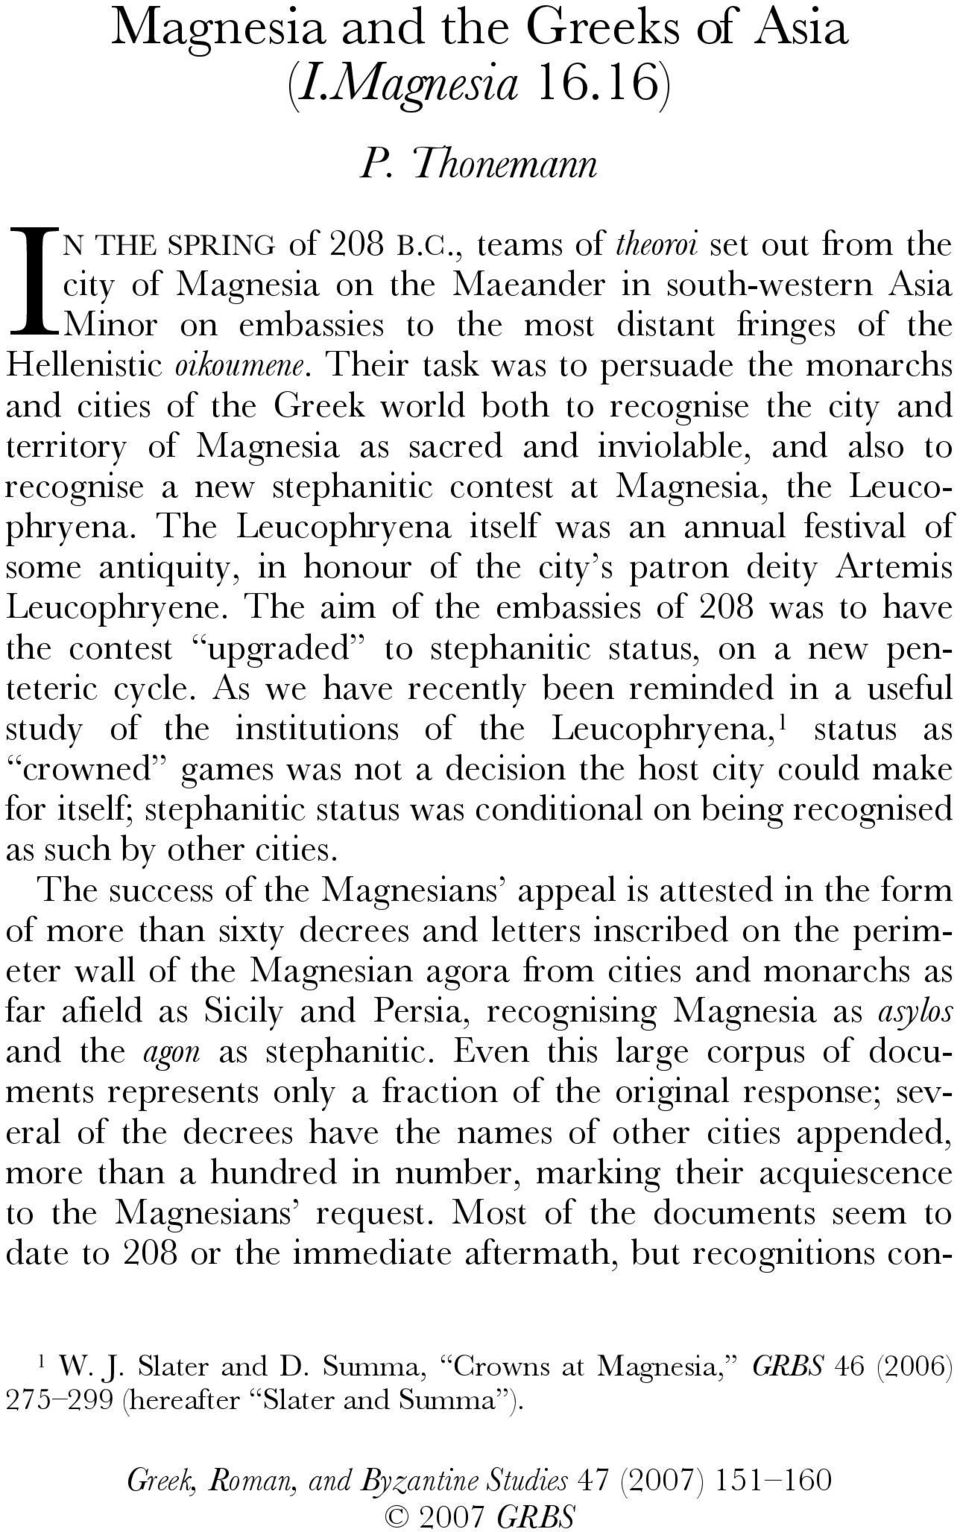 Their task was to persuade the monarchs and cities of the Greek world both to recognise the city and territory of Magnesia as sacred and inviolable, and also to recognise a new stephanitic contest at